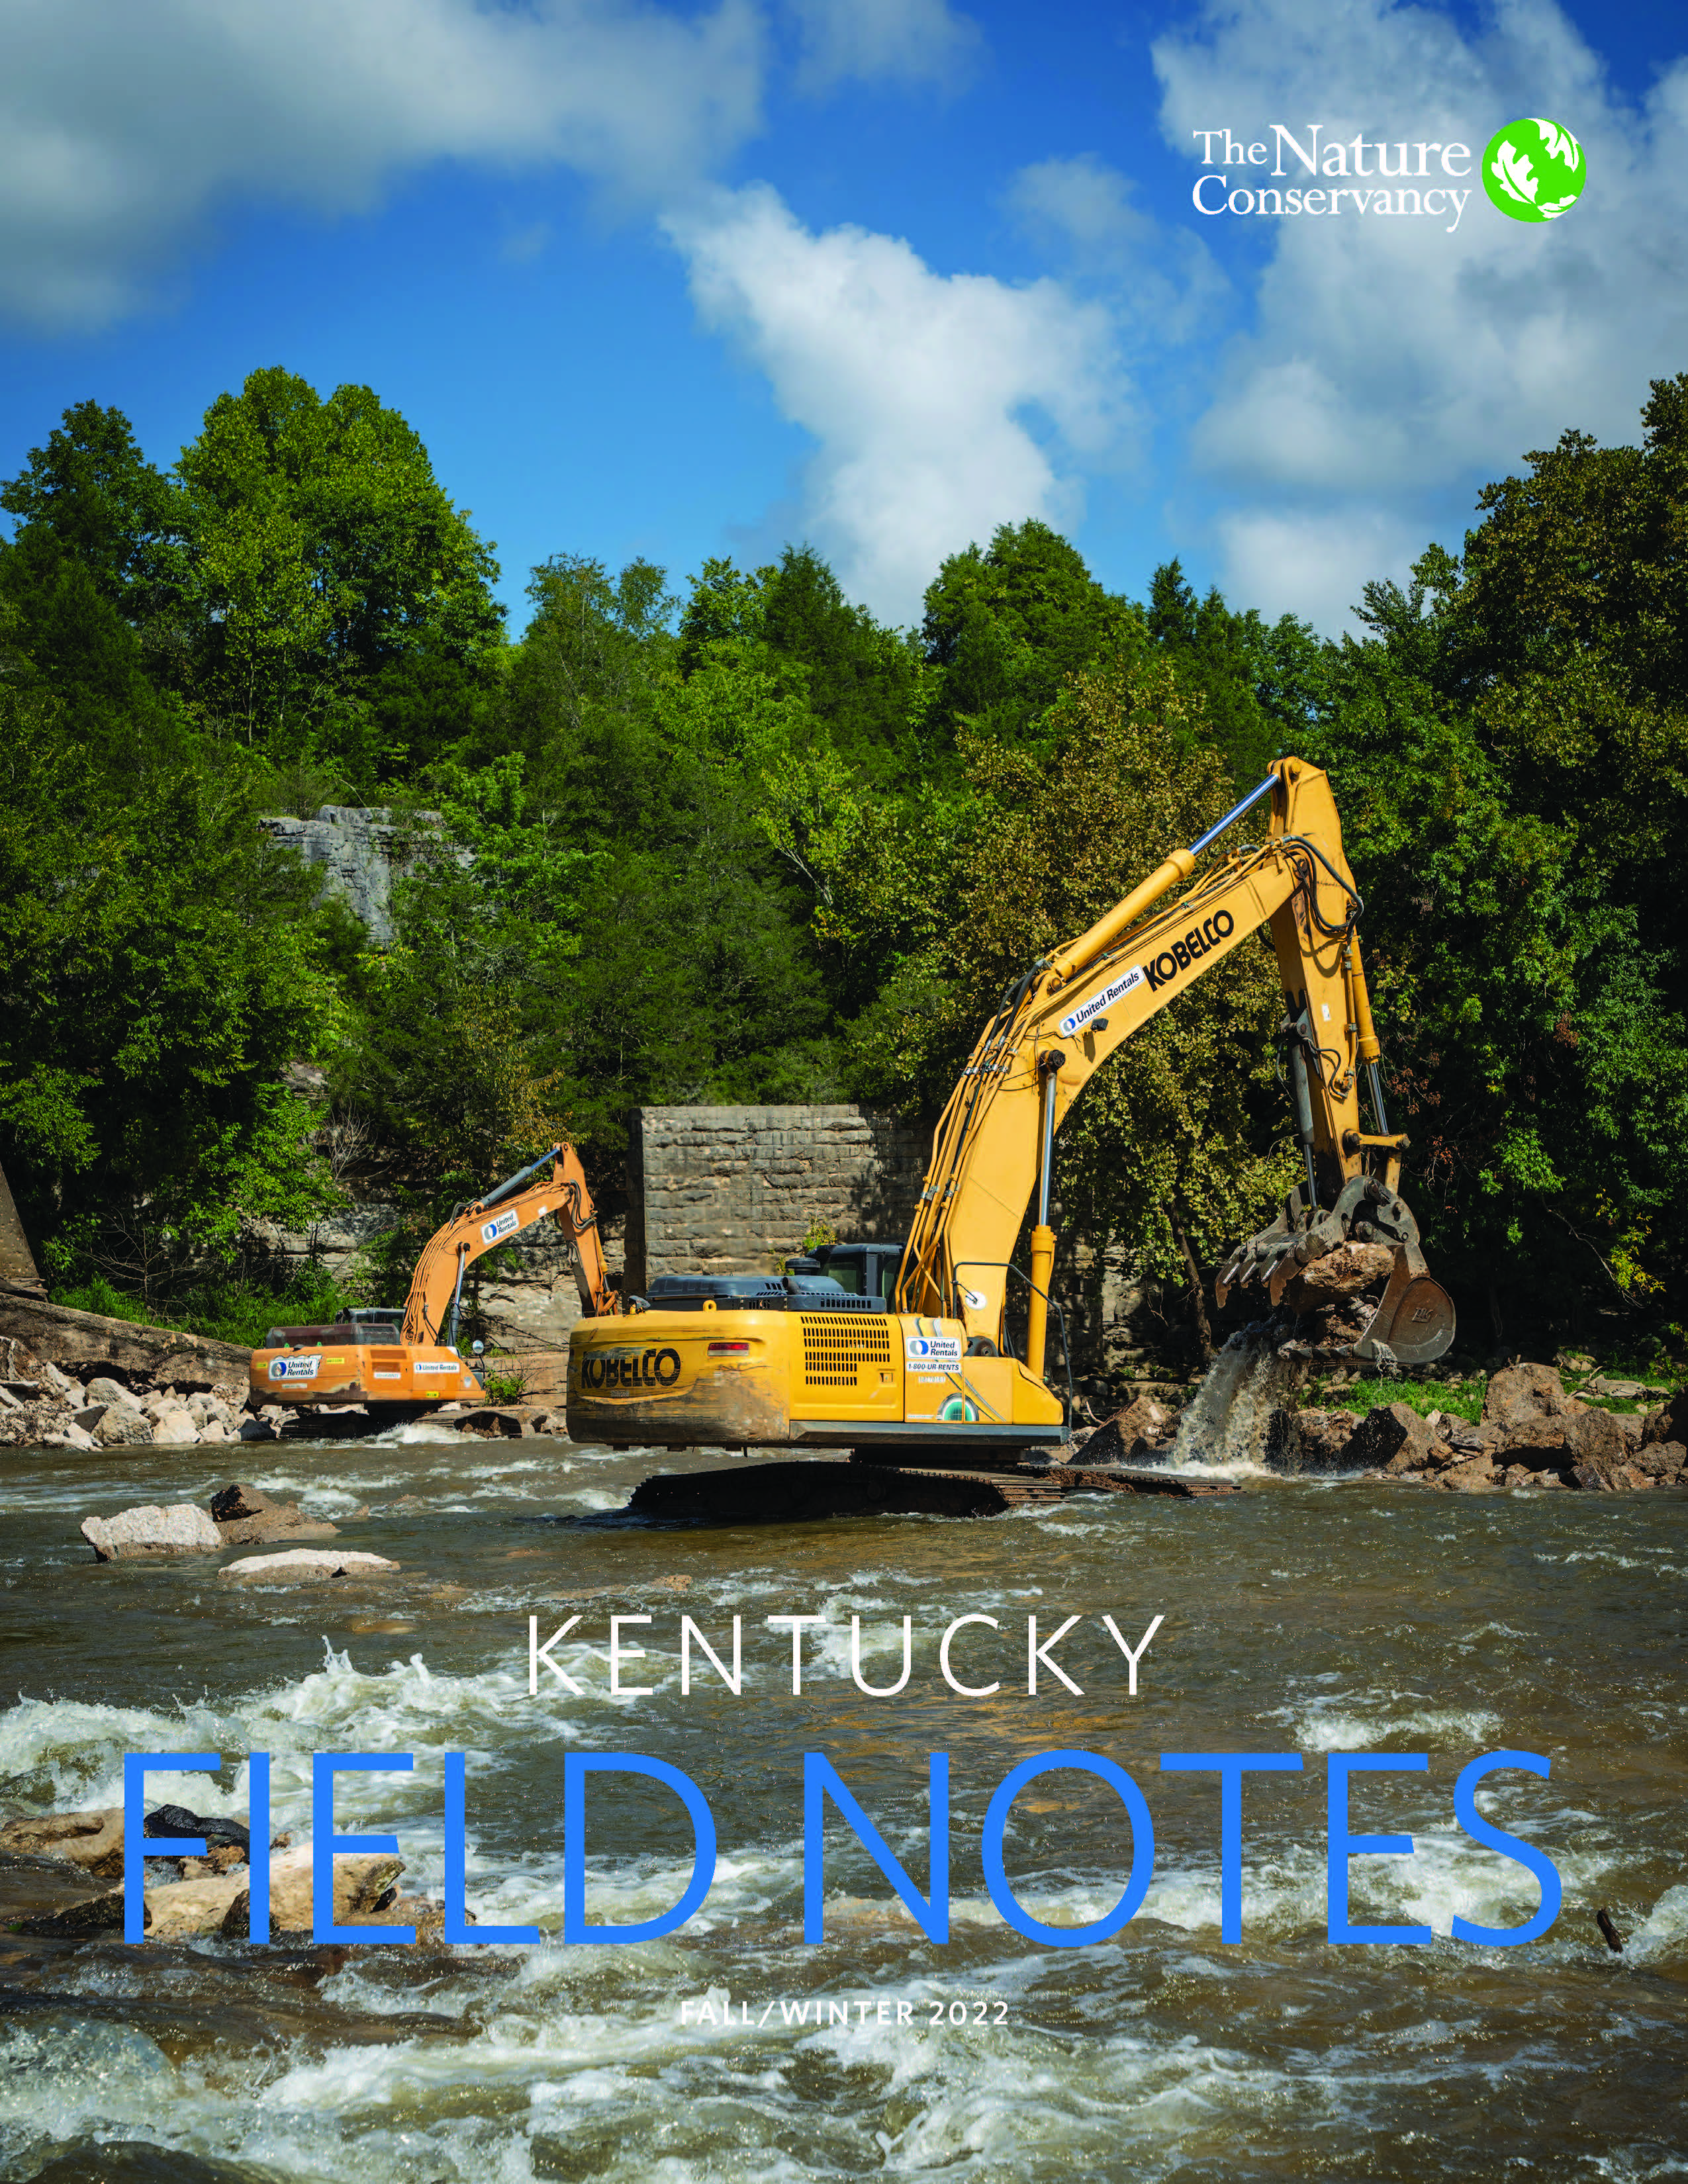 A bulldozer works at a dam removal site in a river.